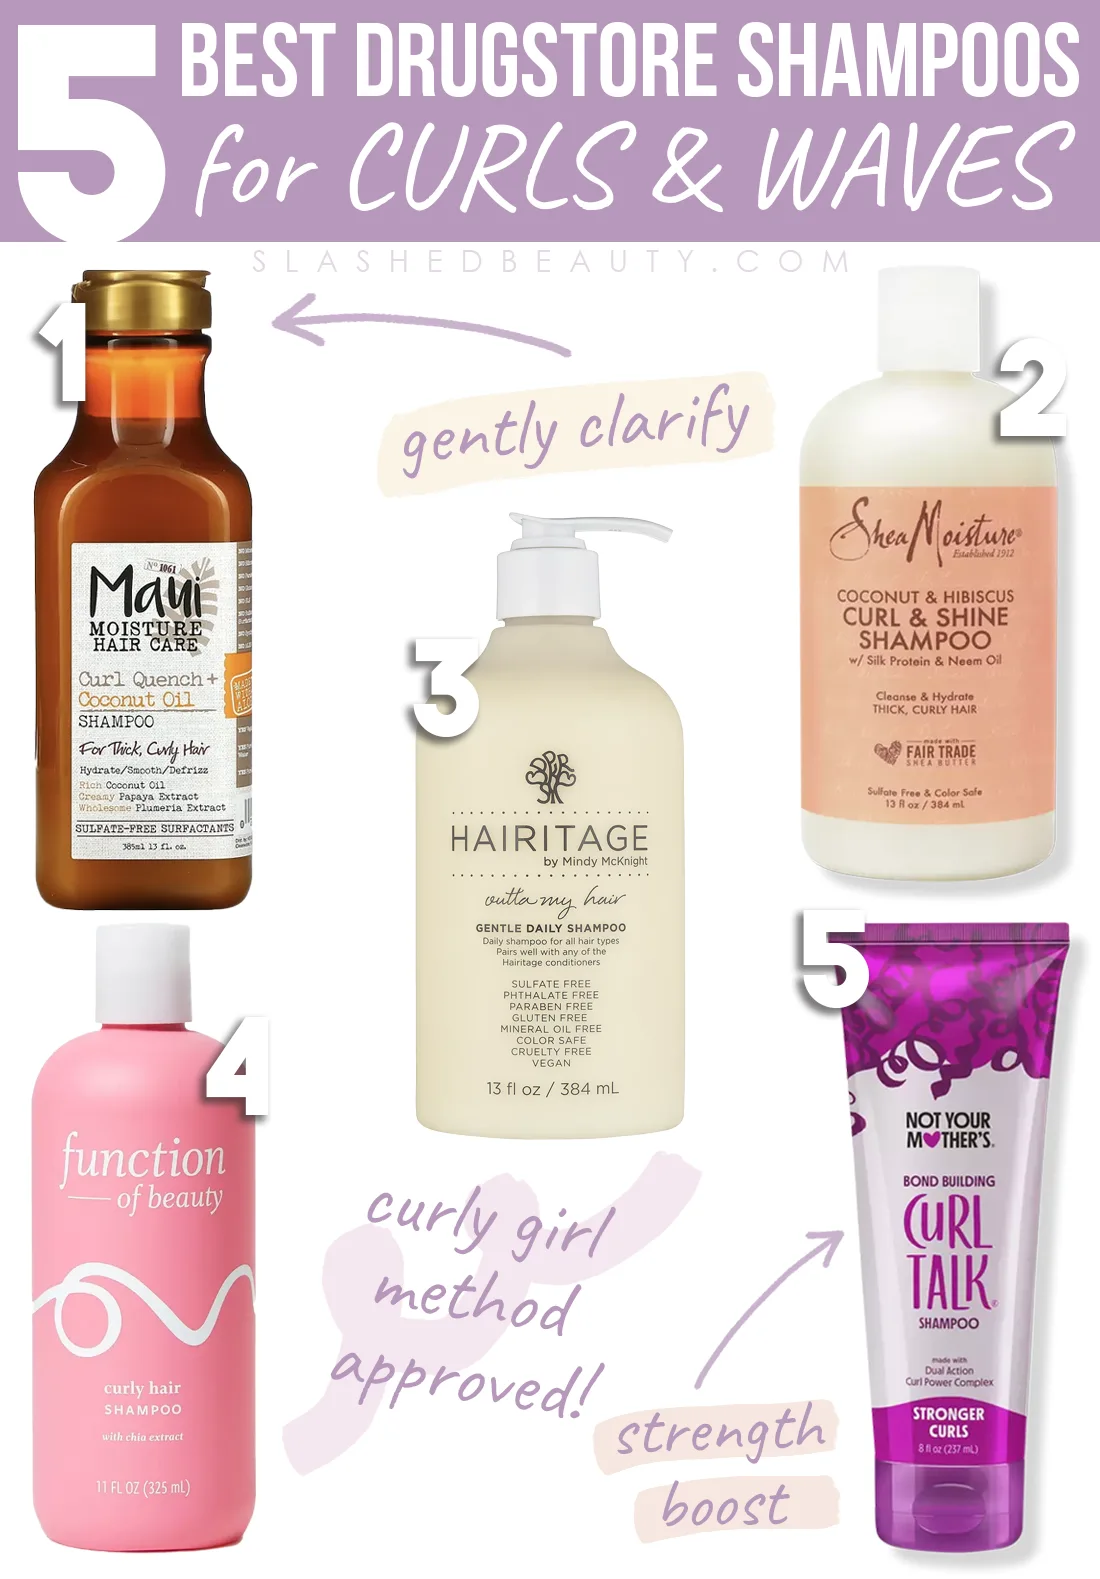 Collage of drugstore shampoos for curly and wavy hair with title: 5 Best Drugstore Shampoos for Curls and Waves | Slashed Beauty